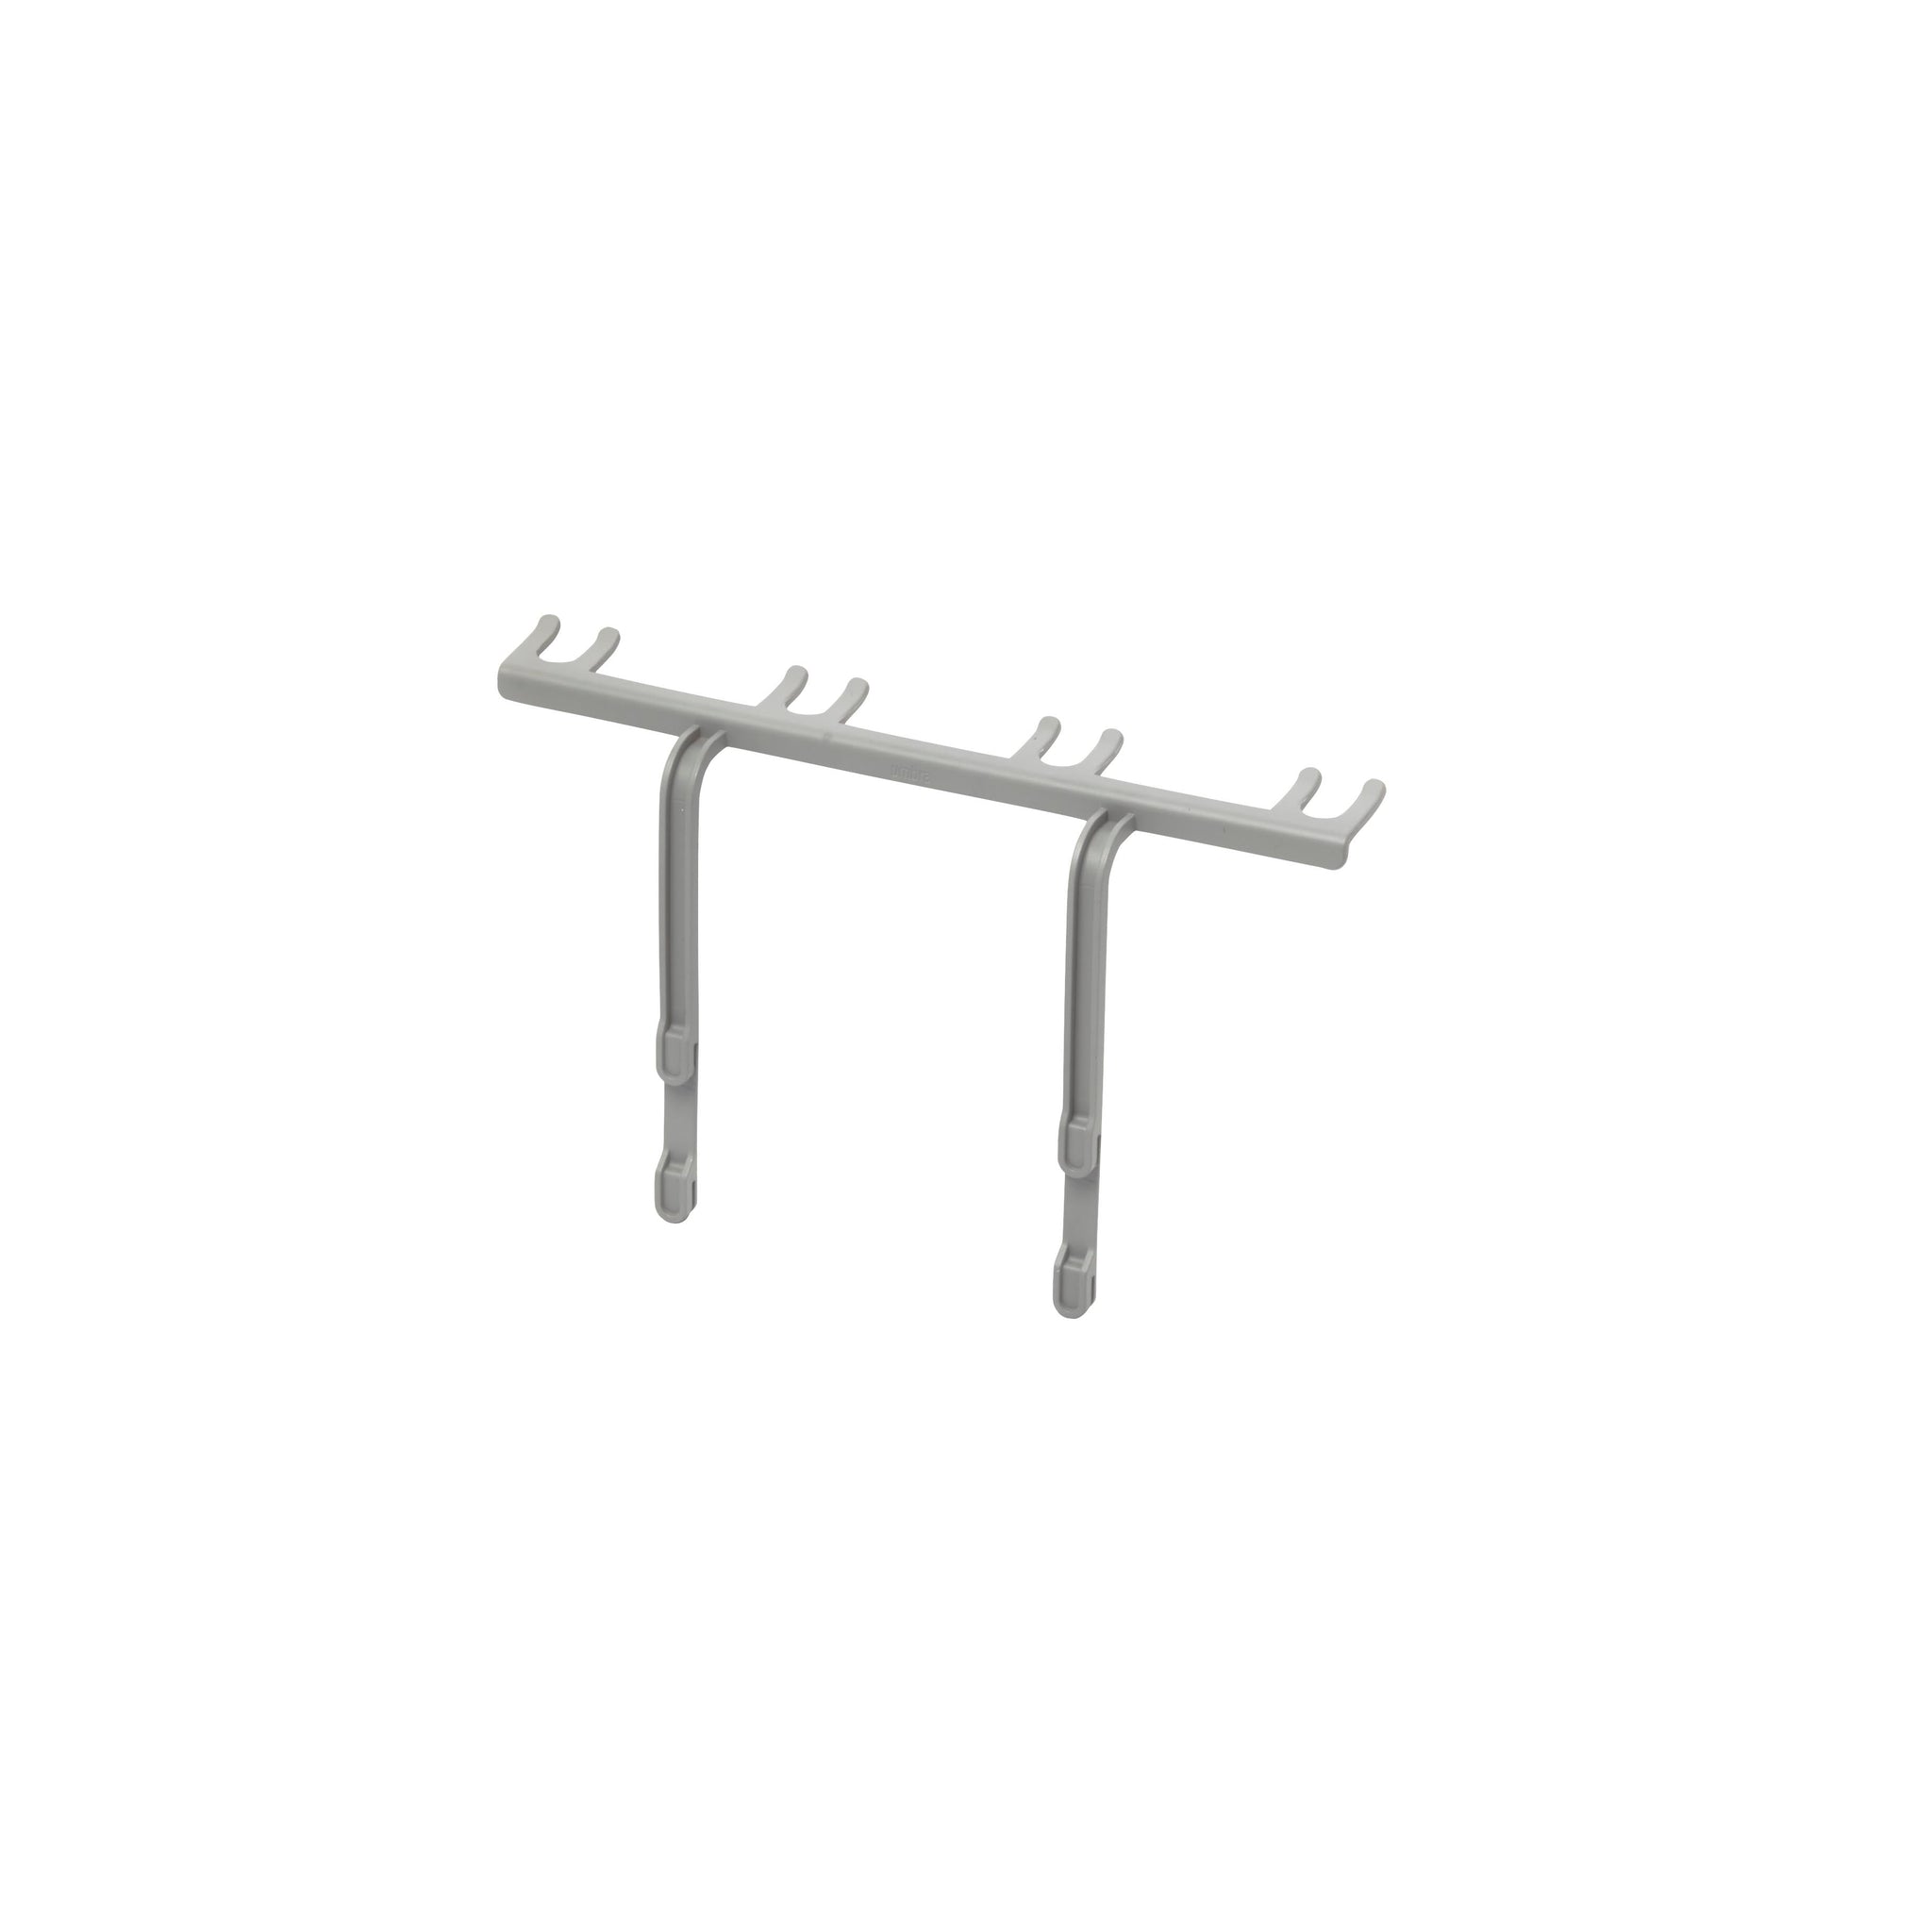 UDry Dishrack with Drying Mat